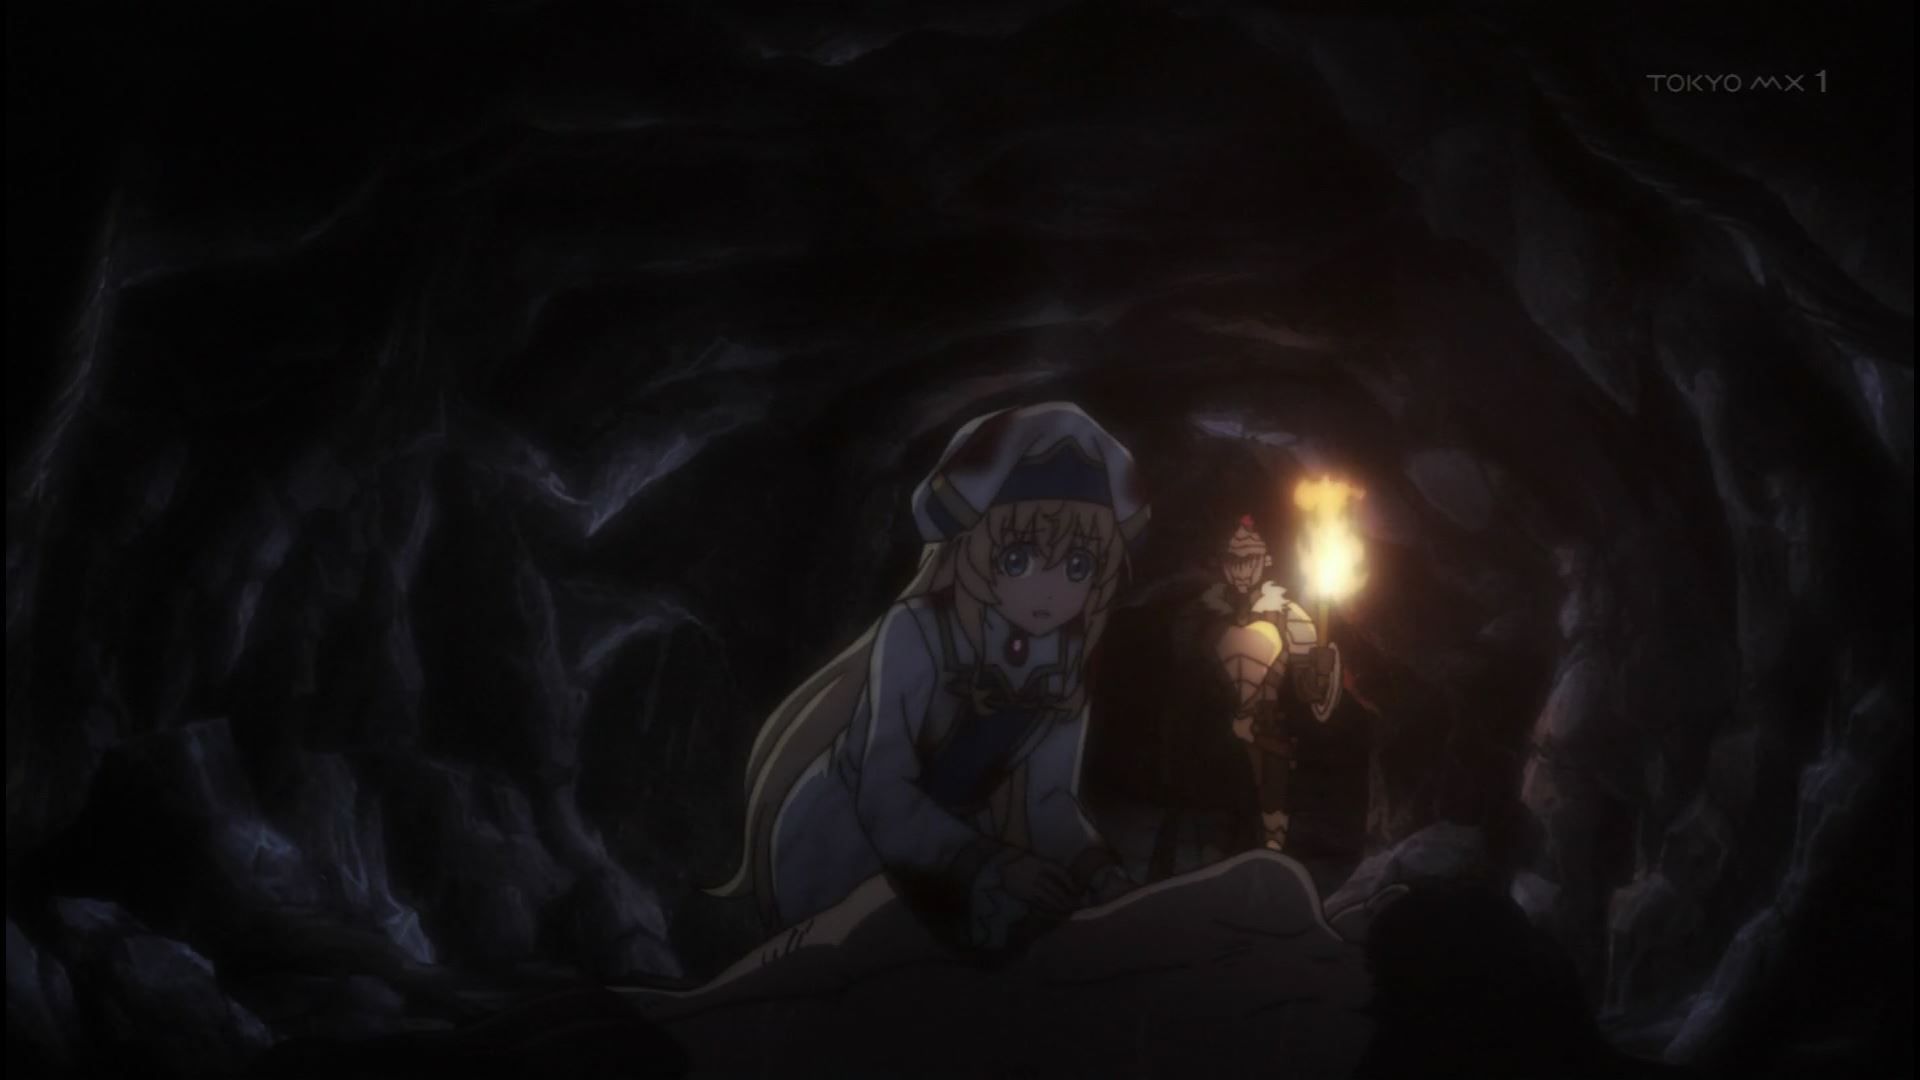 The scene and incontinence scene that the girl is raped by Goblin in one story anime [Goblin Slayer]! 22